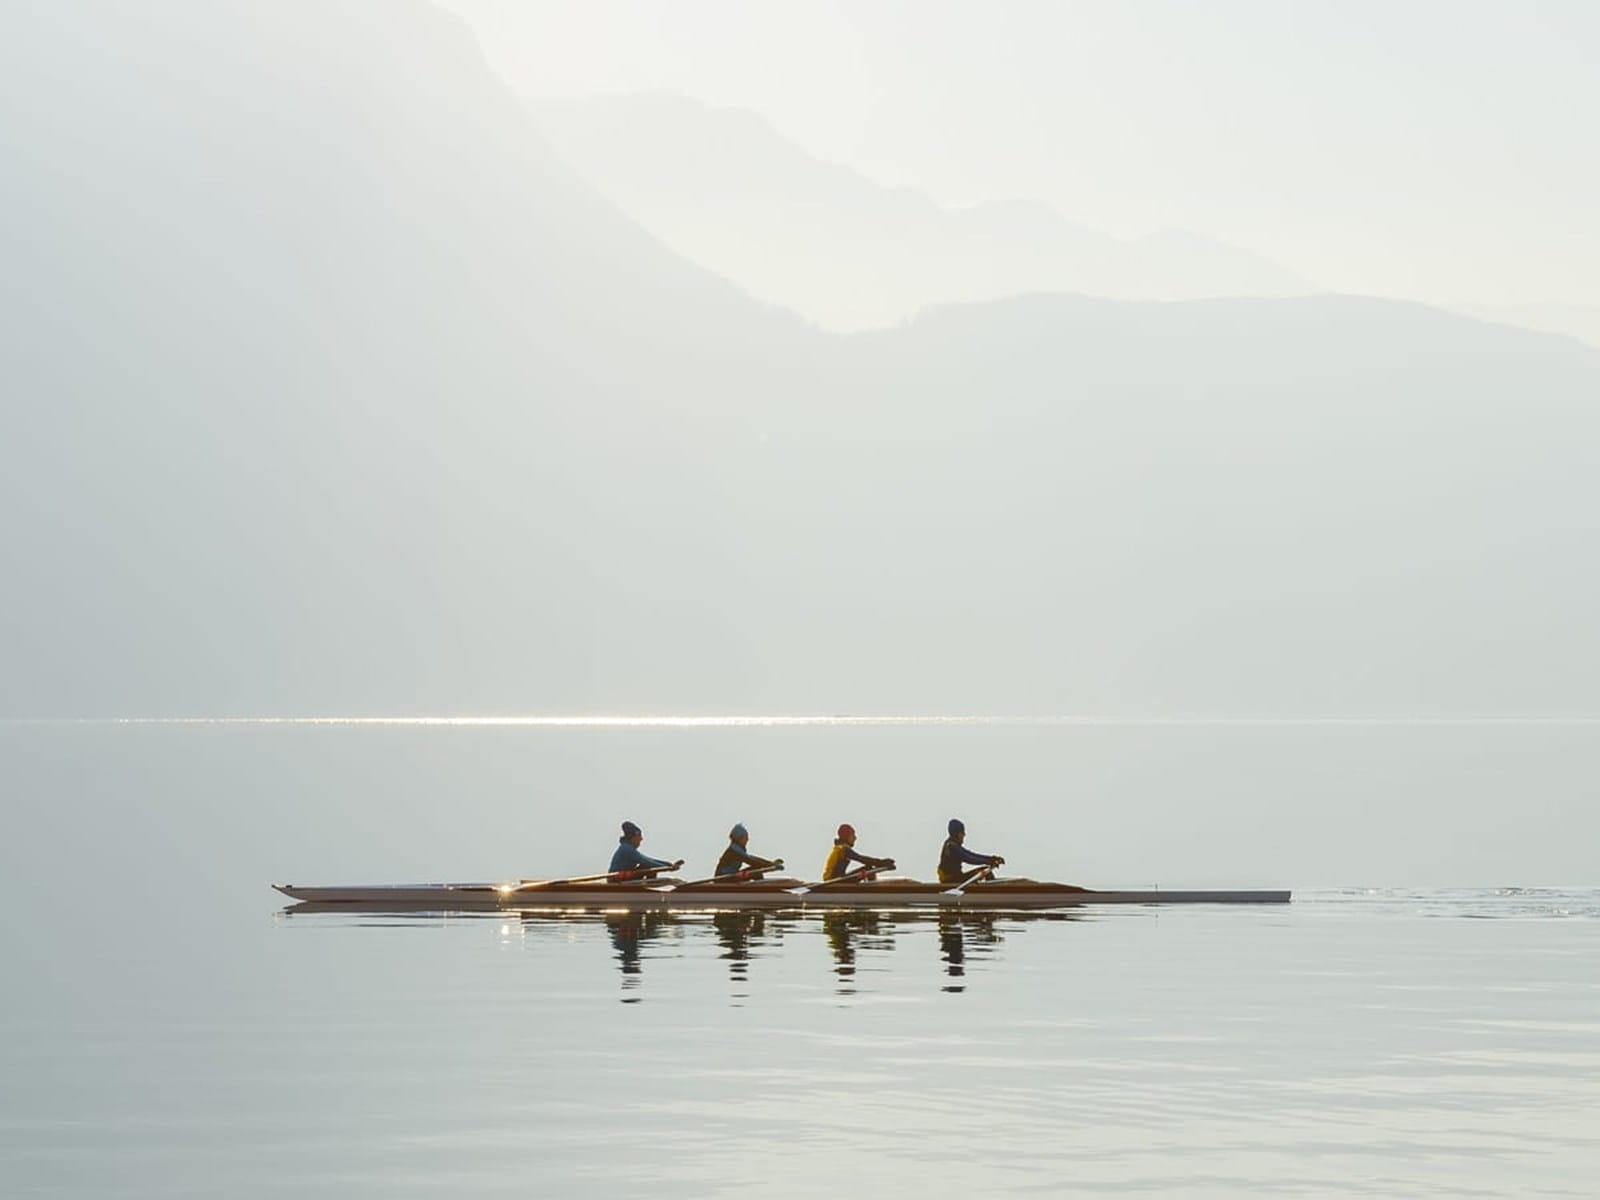 Rowers on a lake